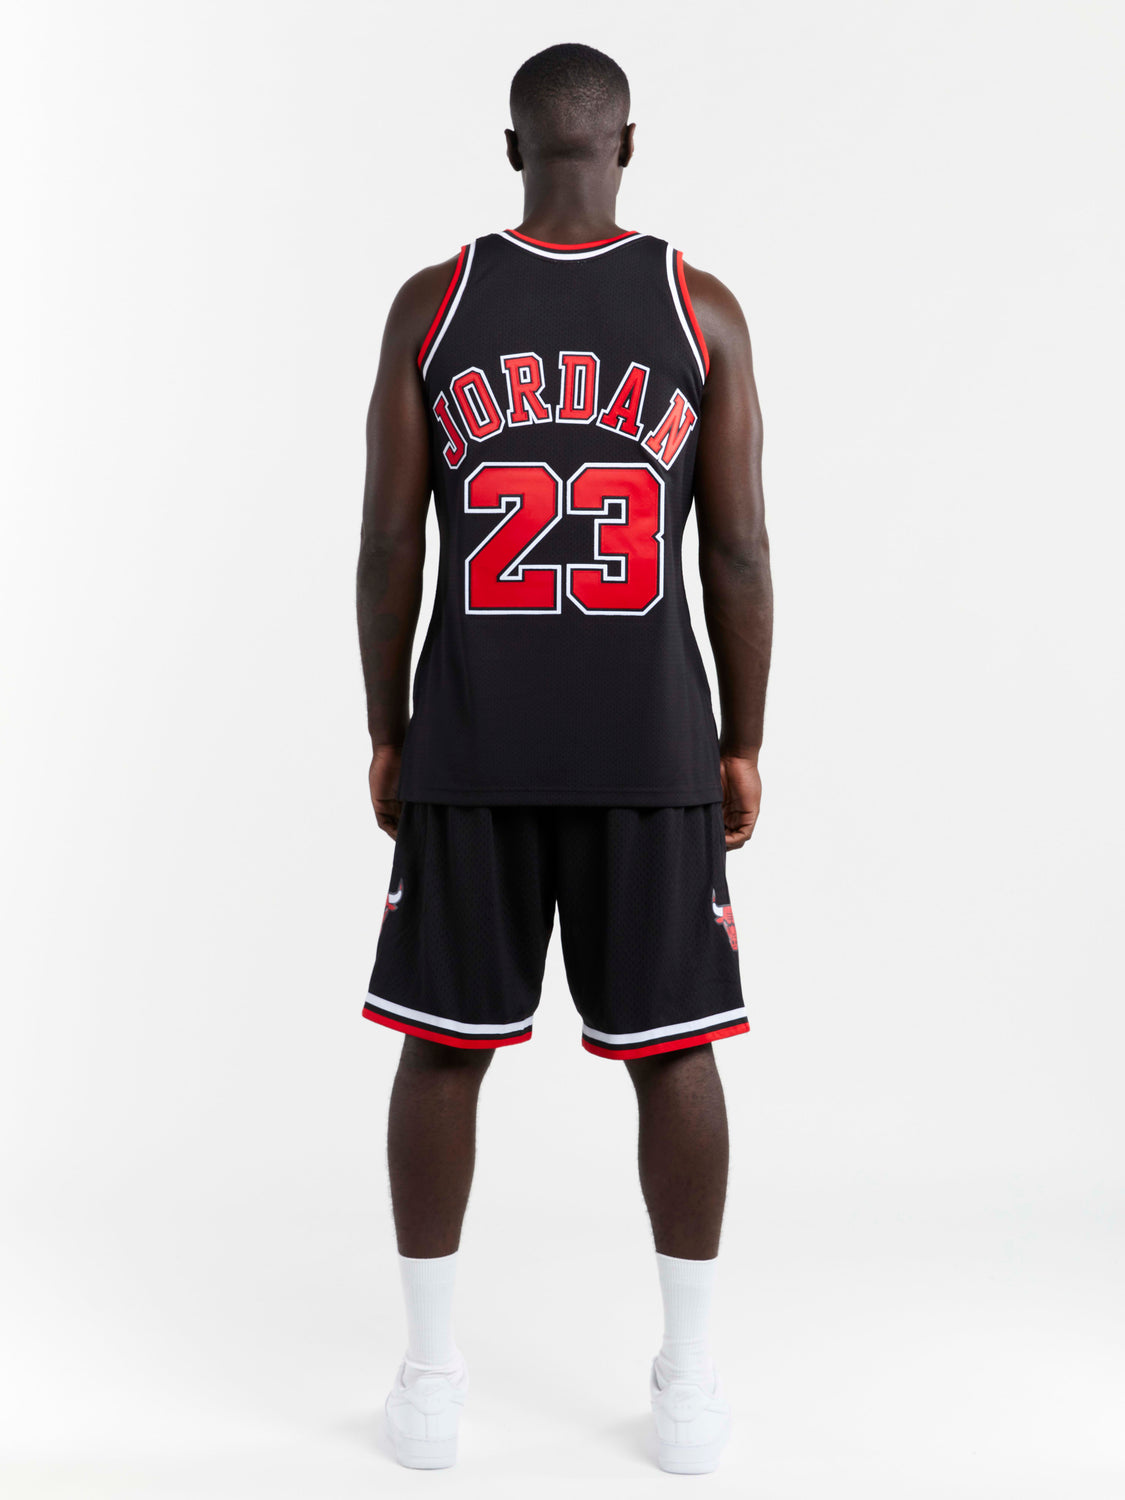 Authentic Jersey Chicago Bulls Alternate 1997-98 Michael Jordan - Shop  Mitchell & Ness Authentic Jerseys and Replicas Mitchell & Ness Nostalgia Co.